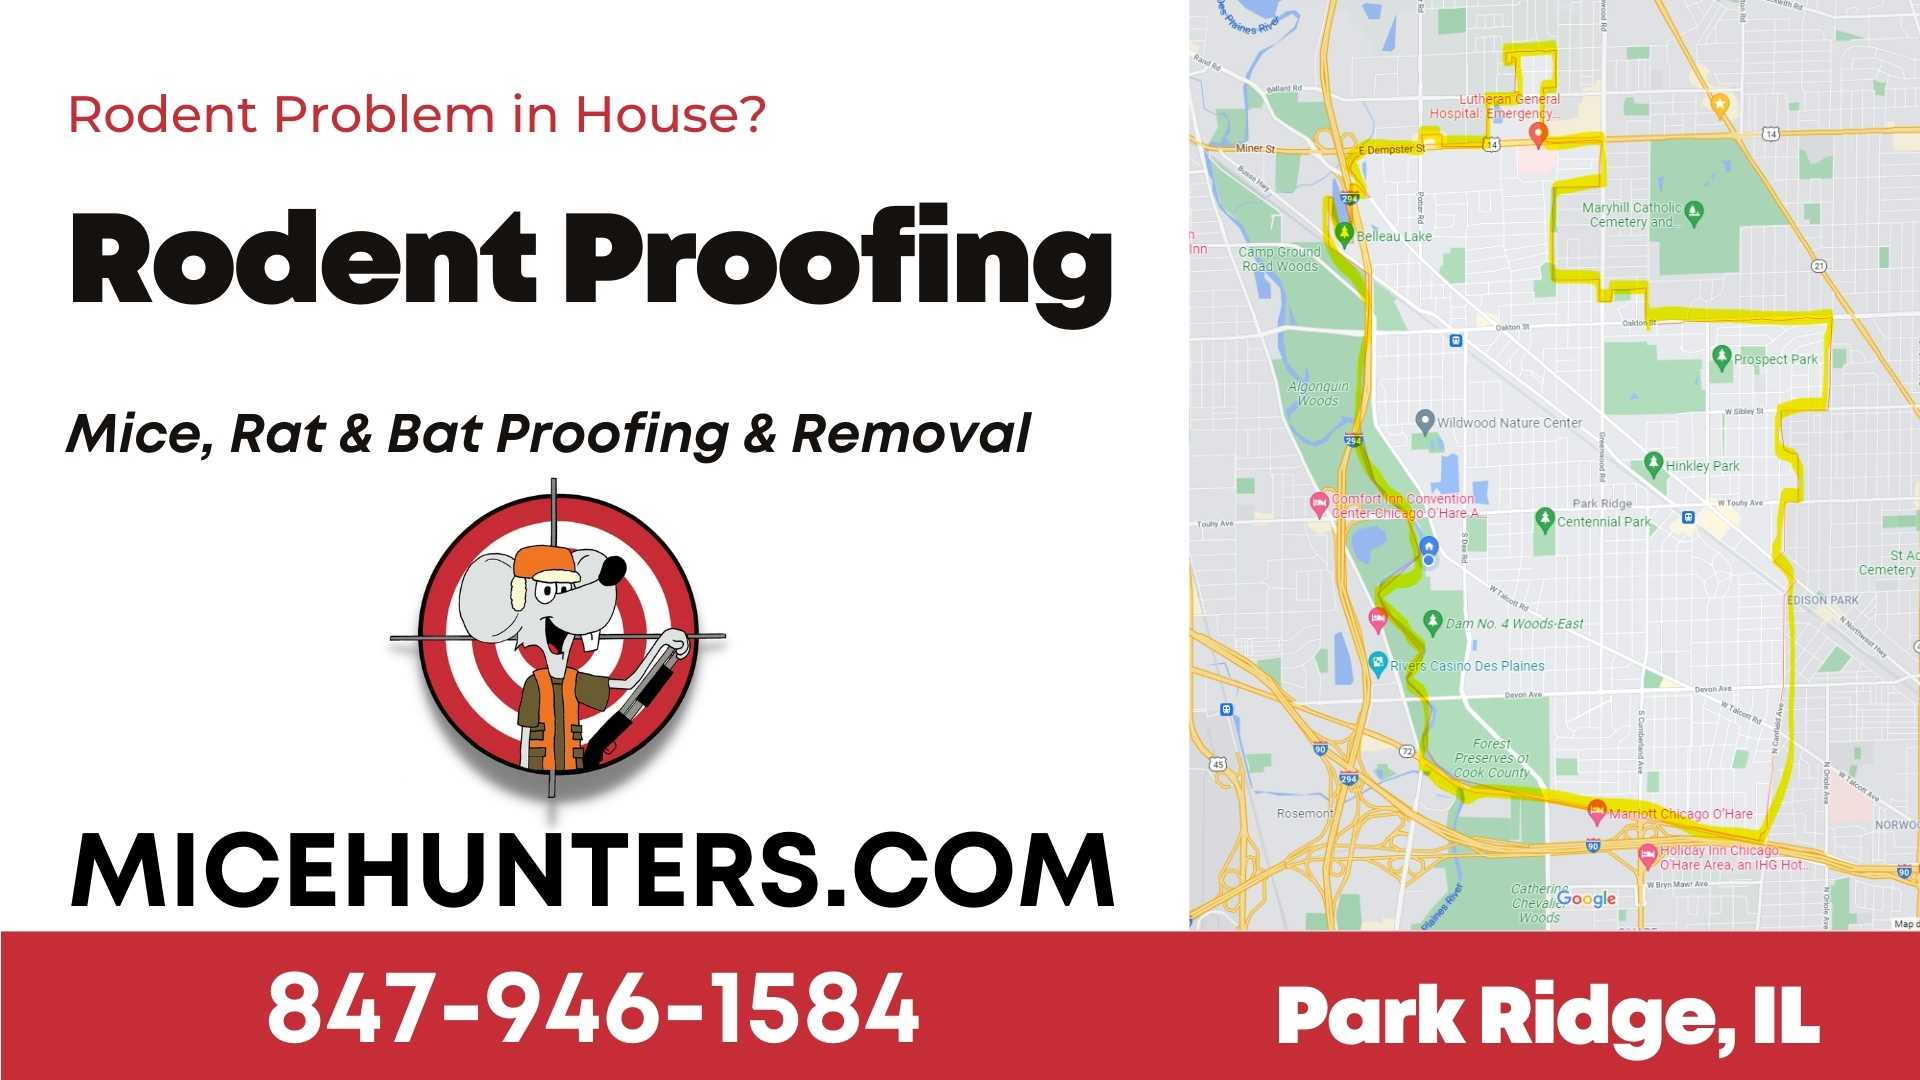 Park Ridge Rodent and Mice Proofing Exterminator near me